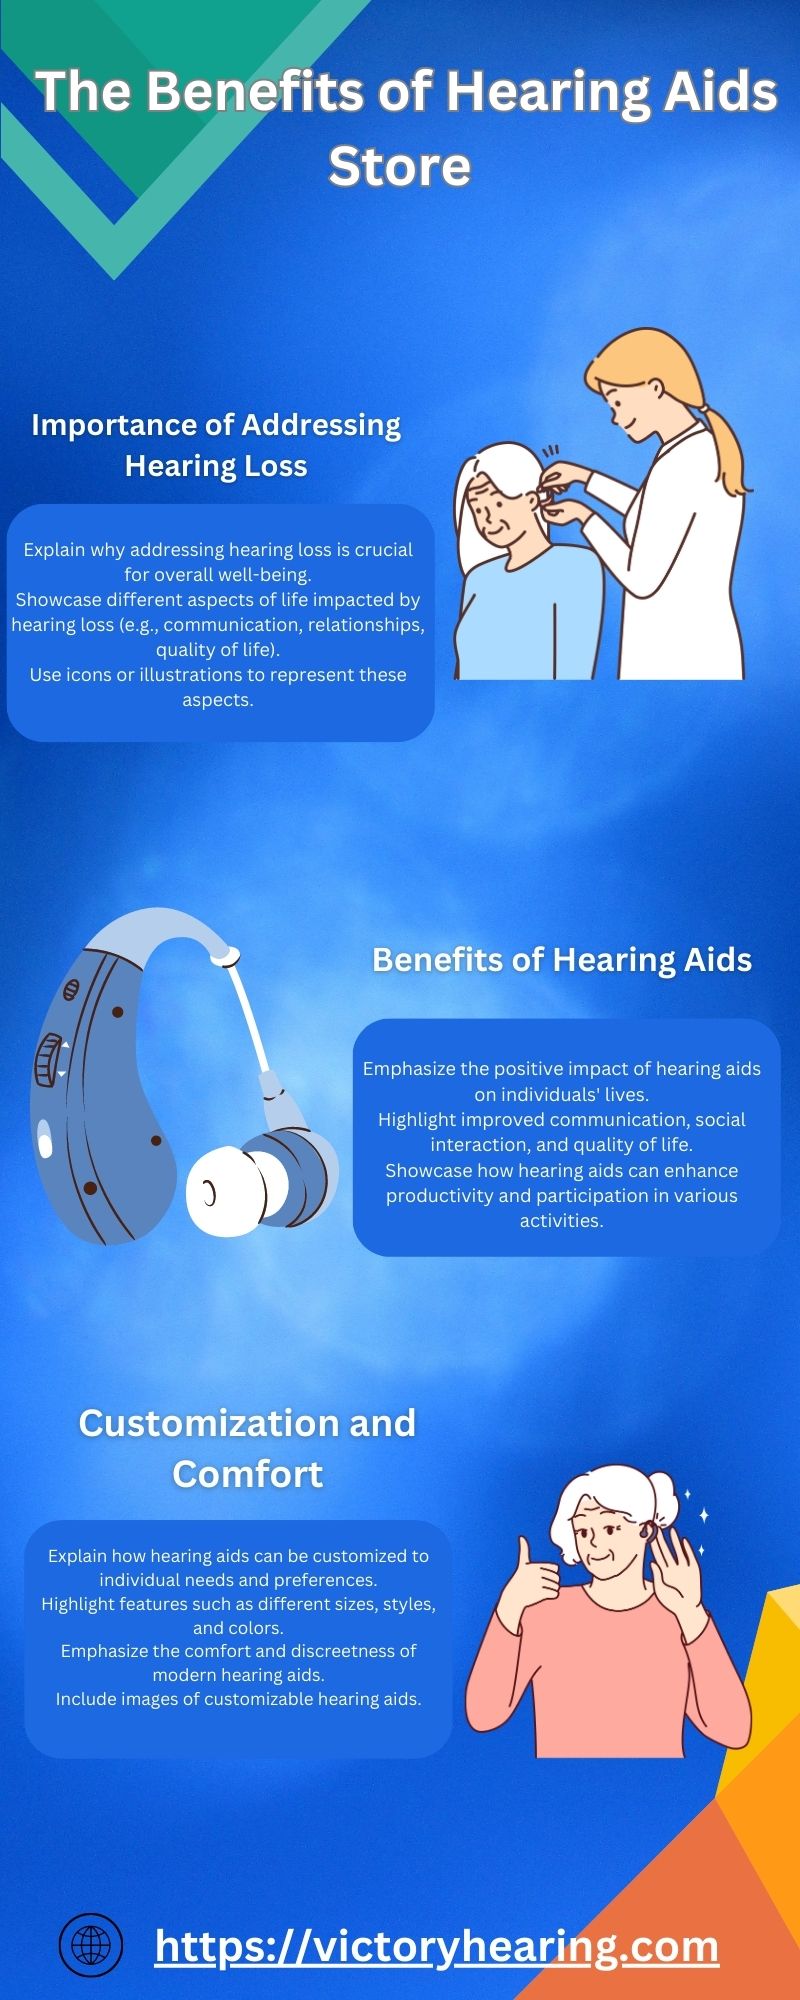   The Benefits of Hearing Aids Store